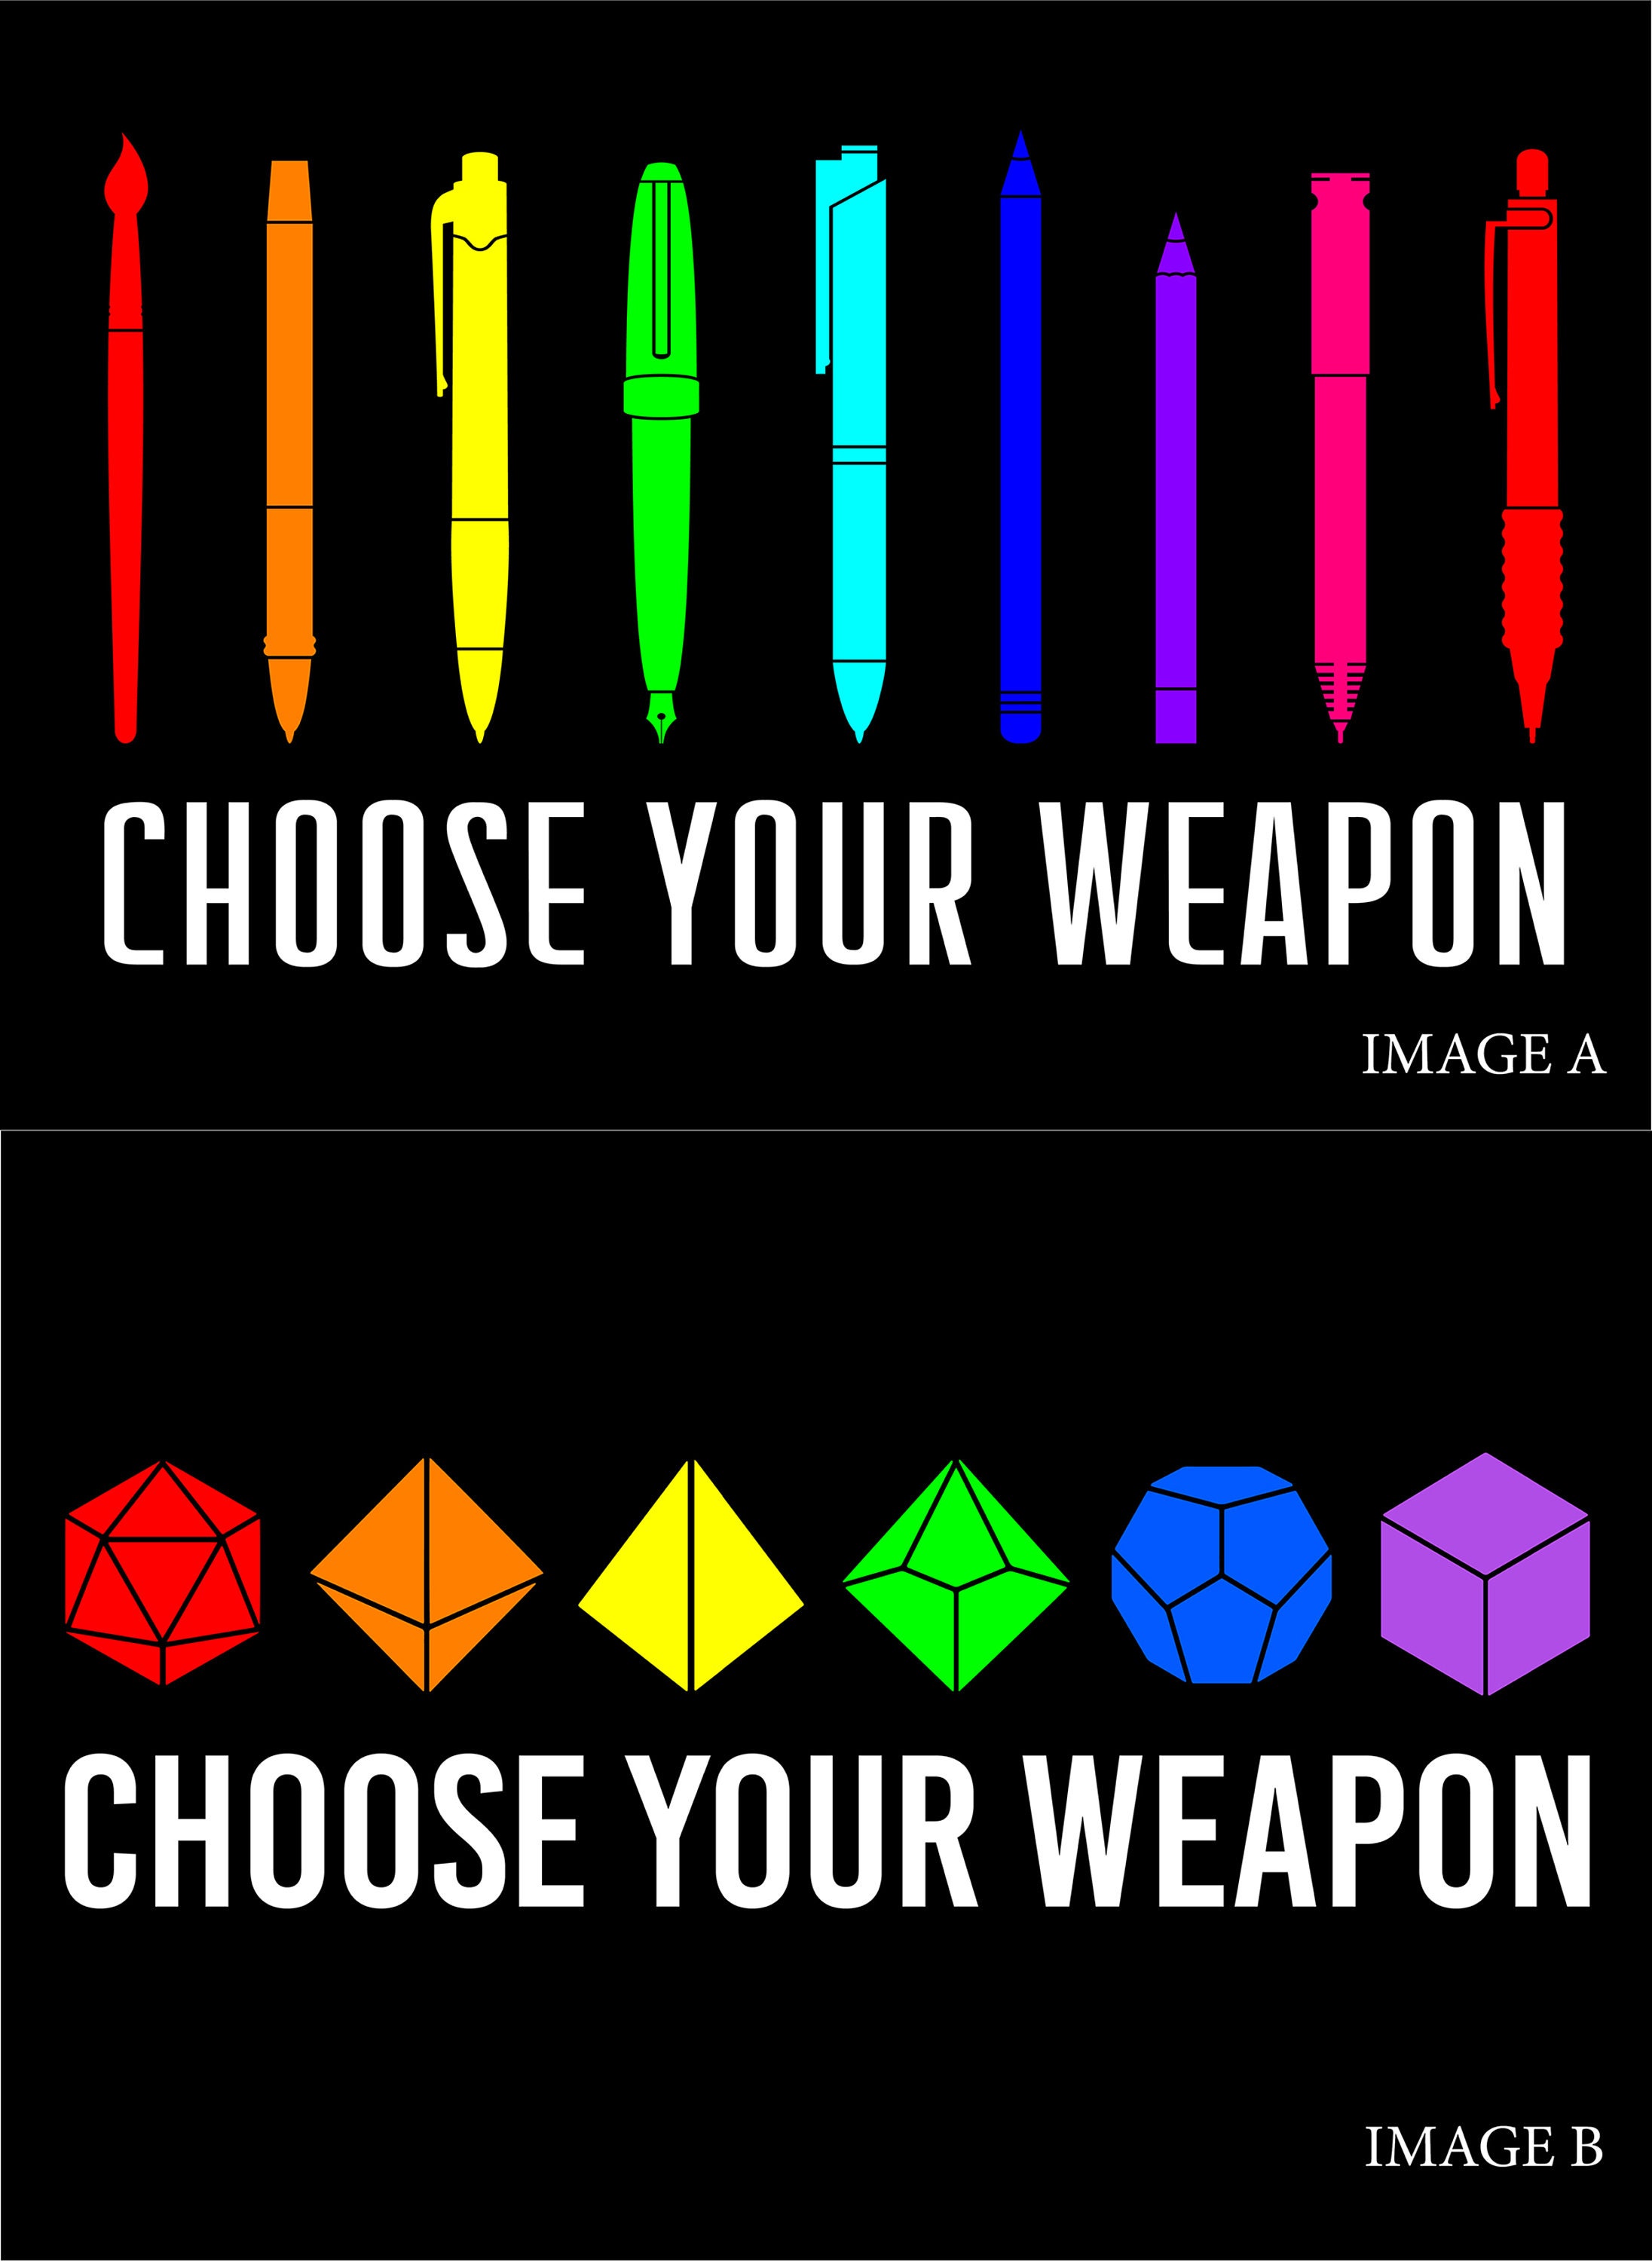 Choose Your Weapons Poster Art And Dice Versions Etsy